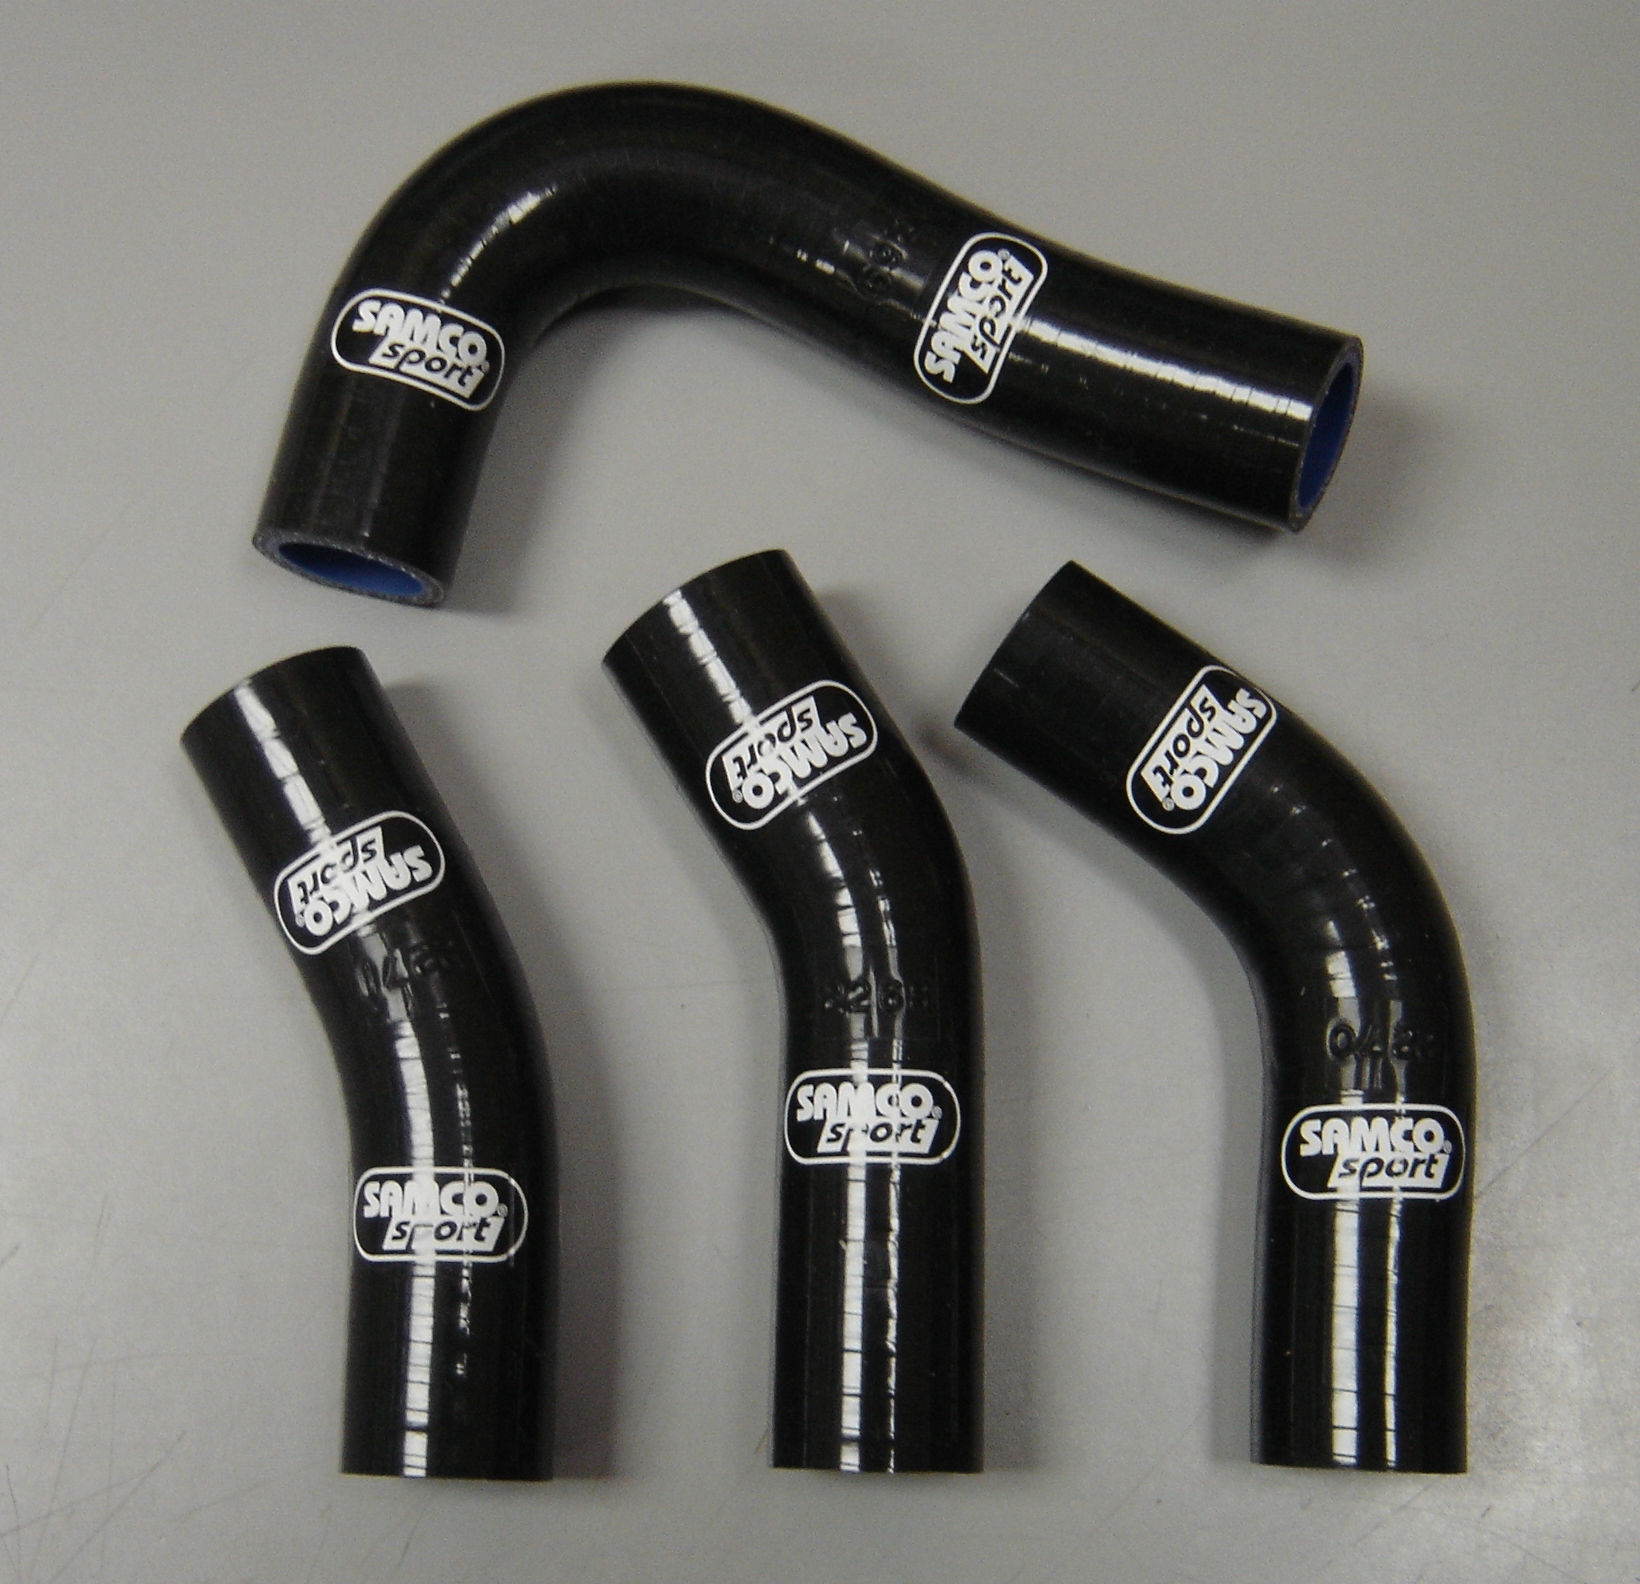 Silicone Radiator Hose Kit for Yamaha RD350 RZ350 All model years BLACK